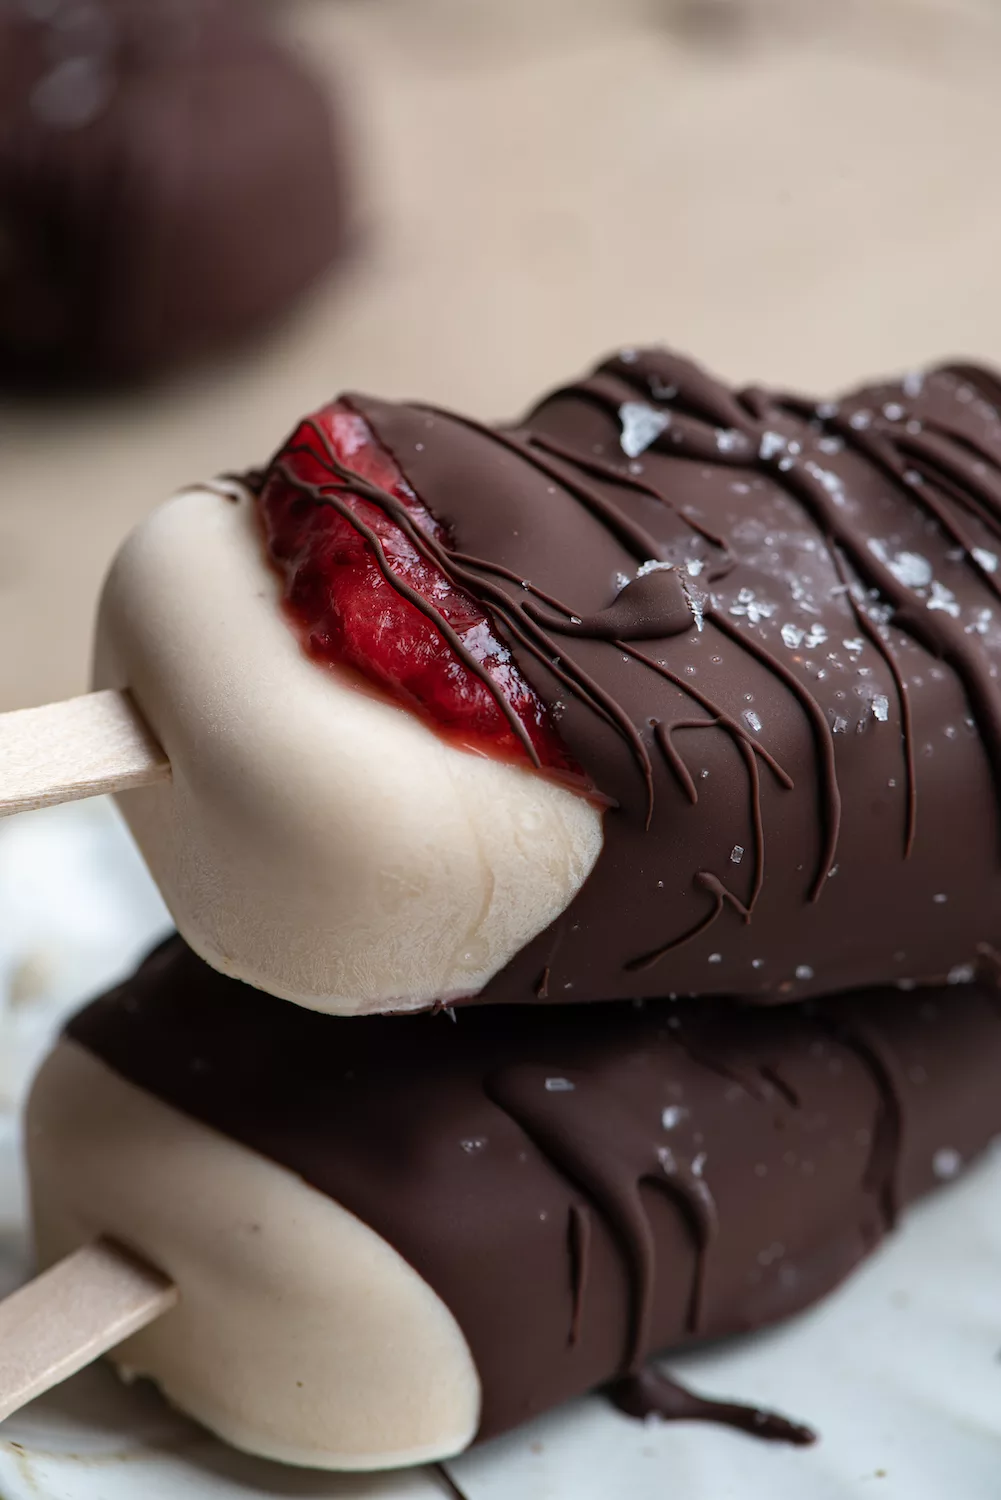 ice cream bar with strawberry jam oozing out of the chocolate dripped cover.